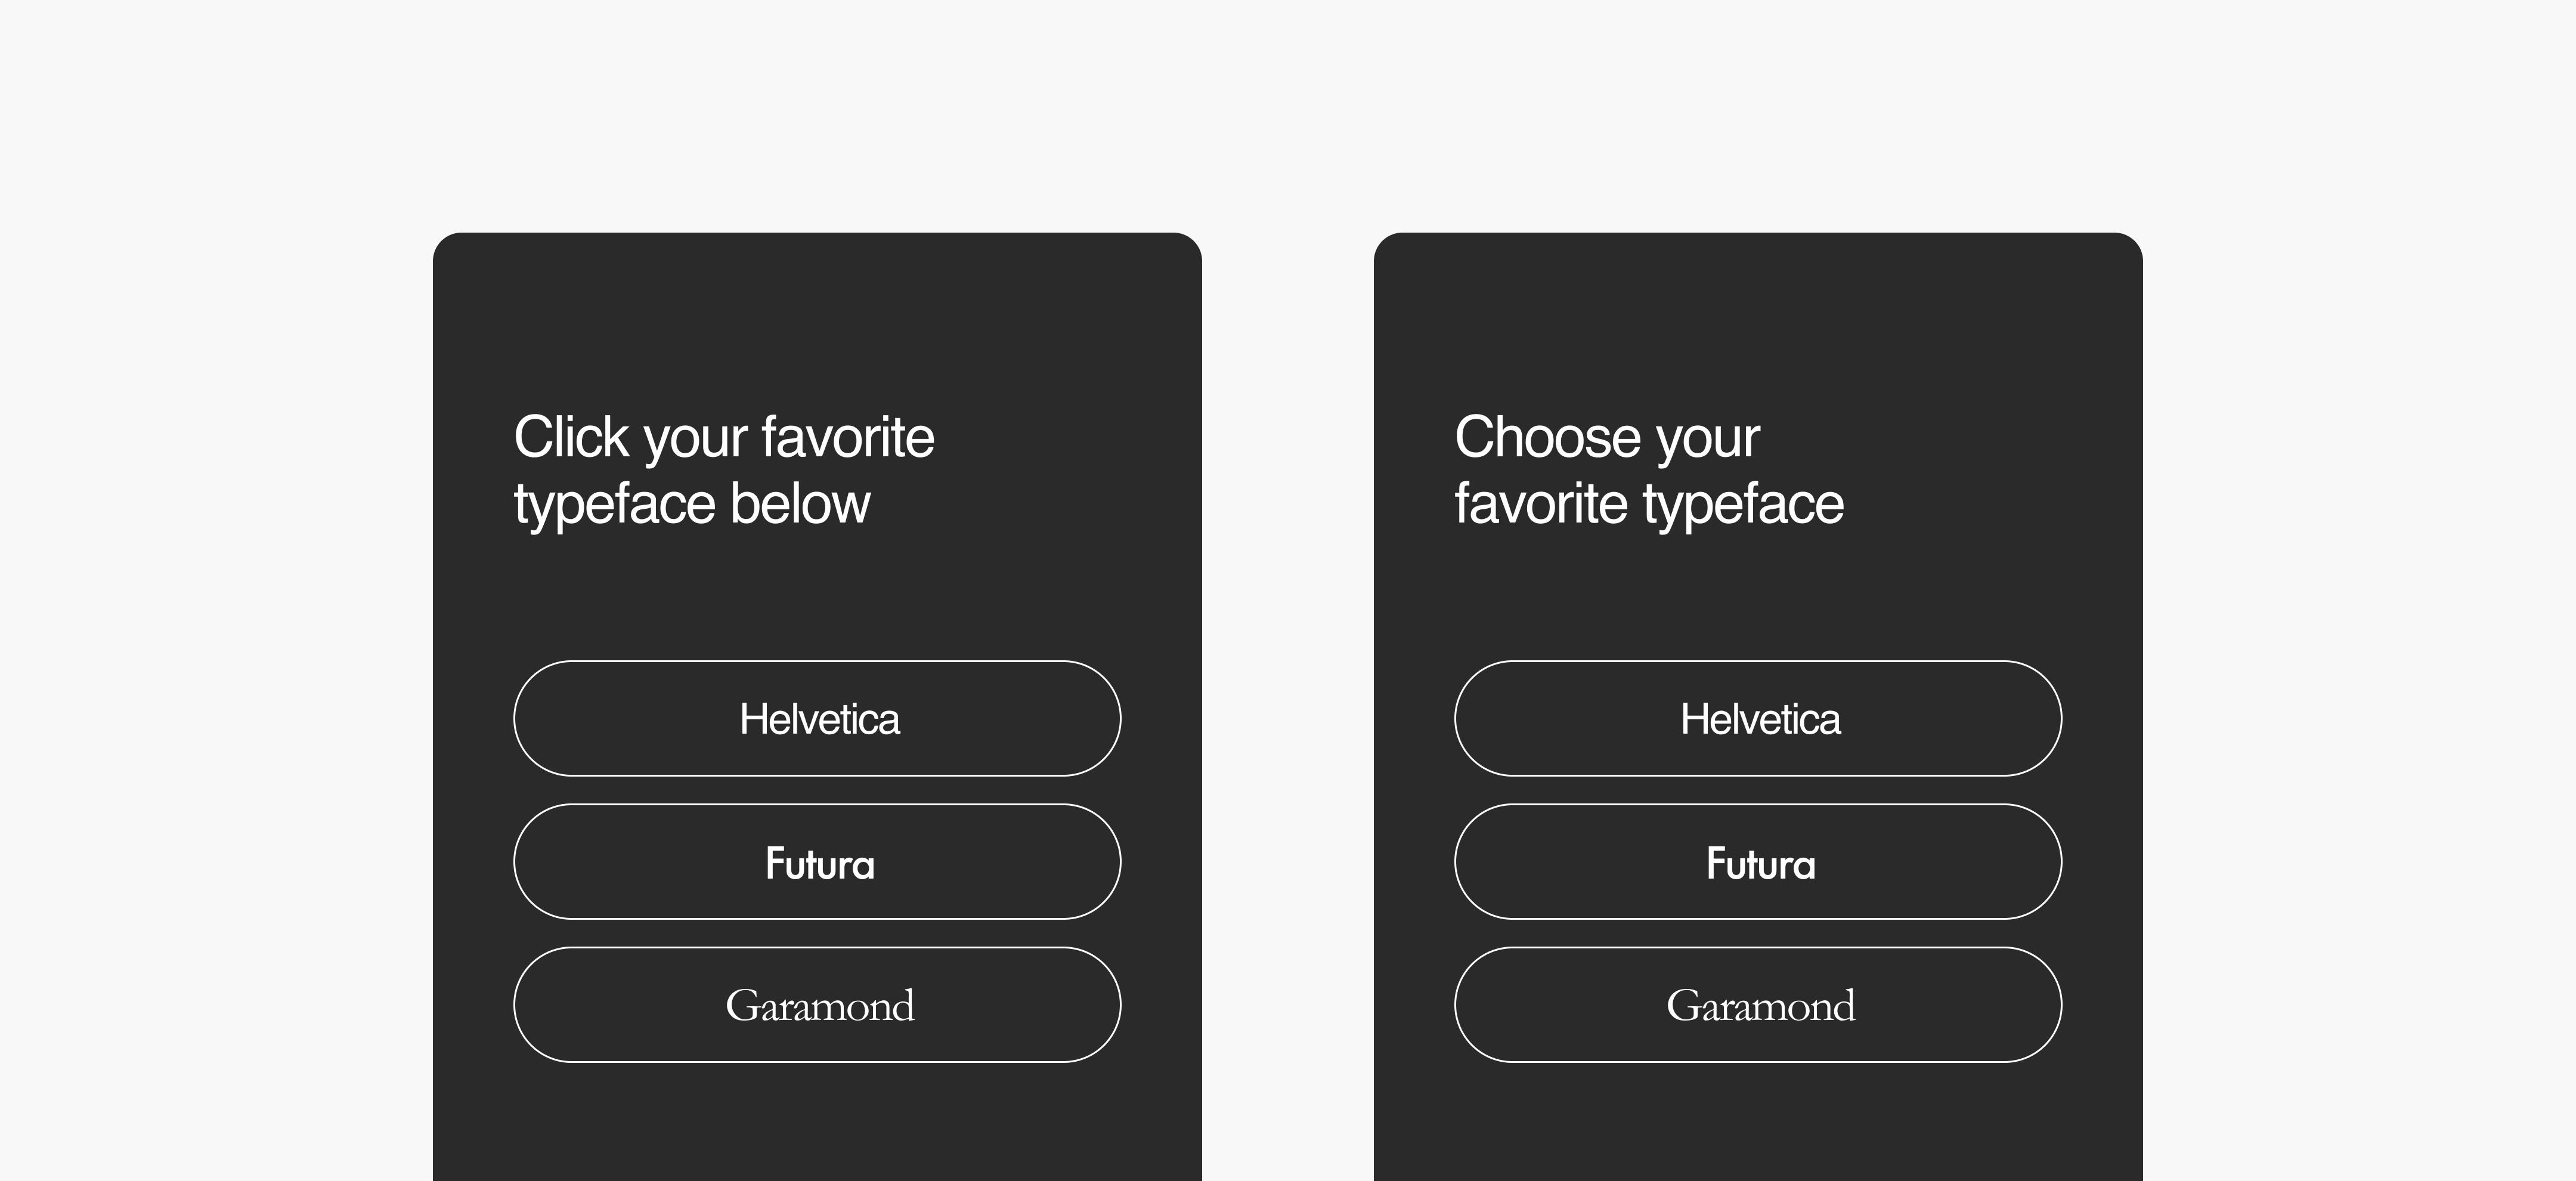 One screen says: click your favorite typeface below. The other says: choose your favorite typeface.